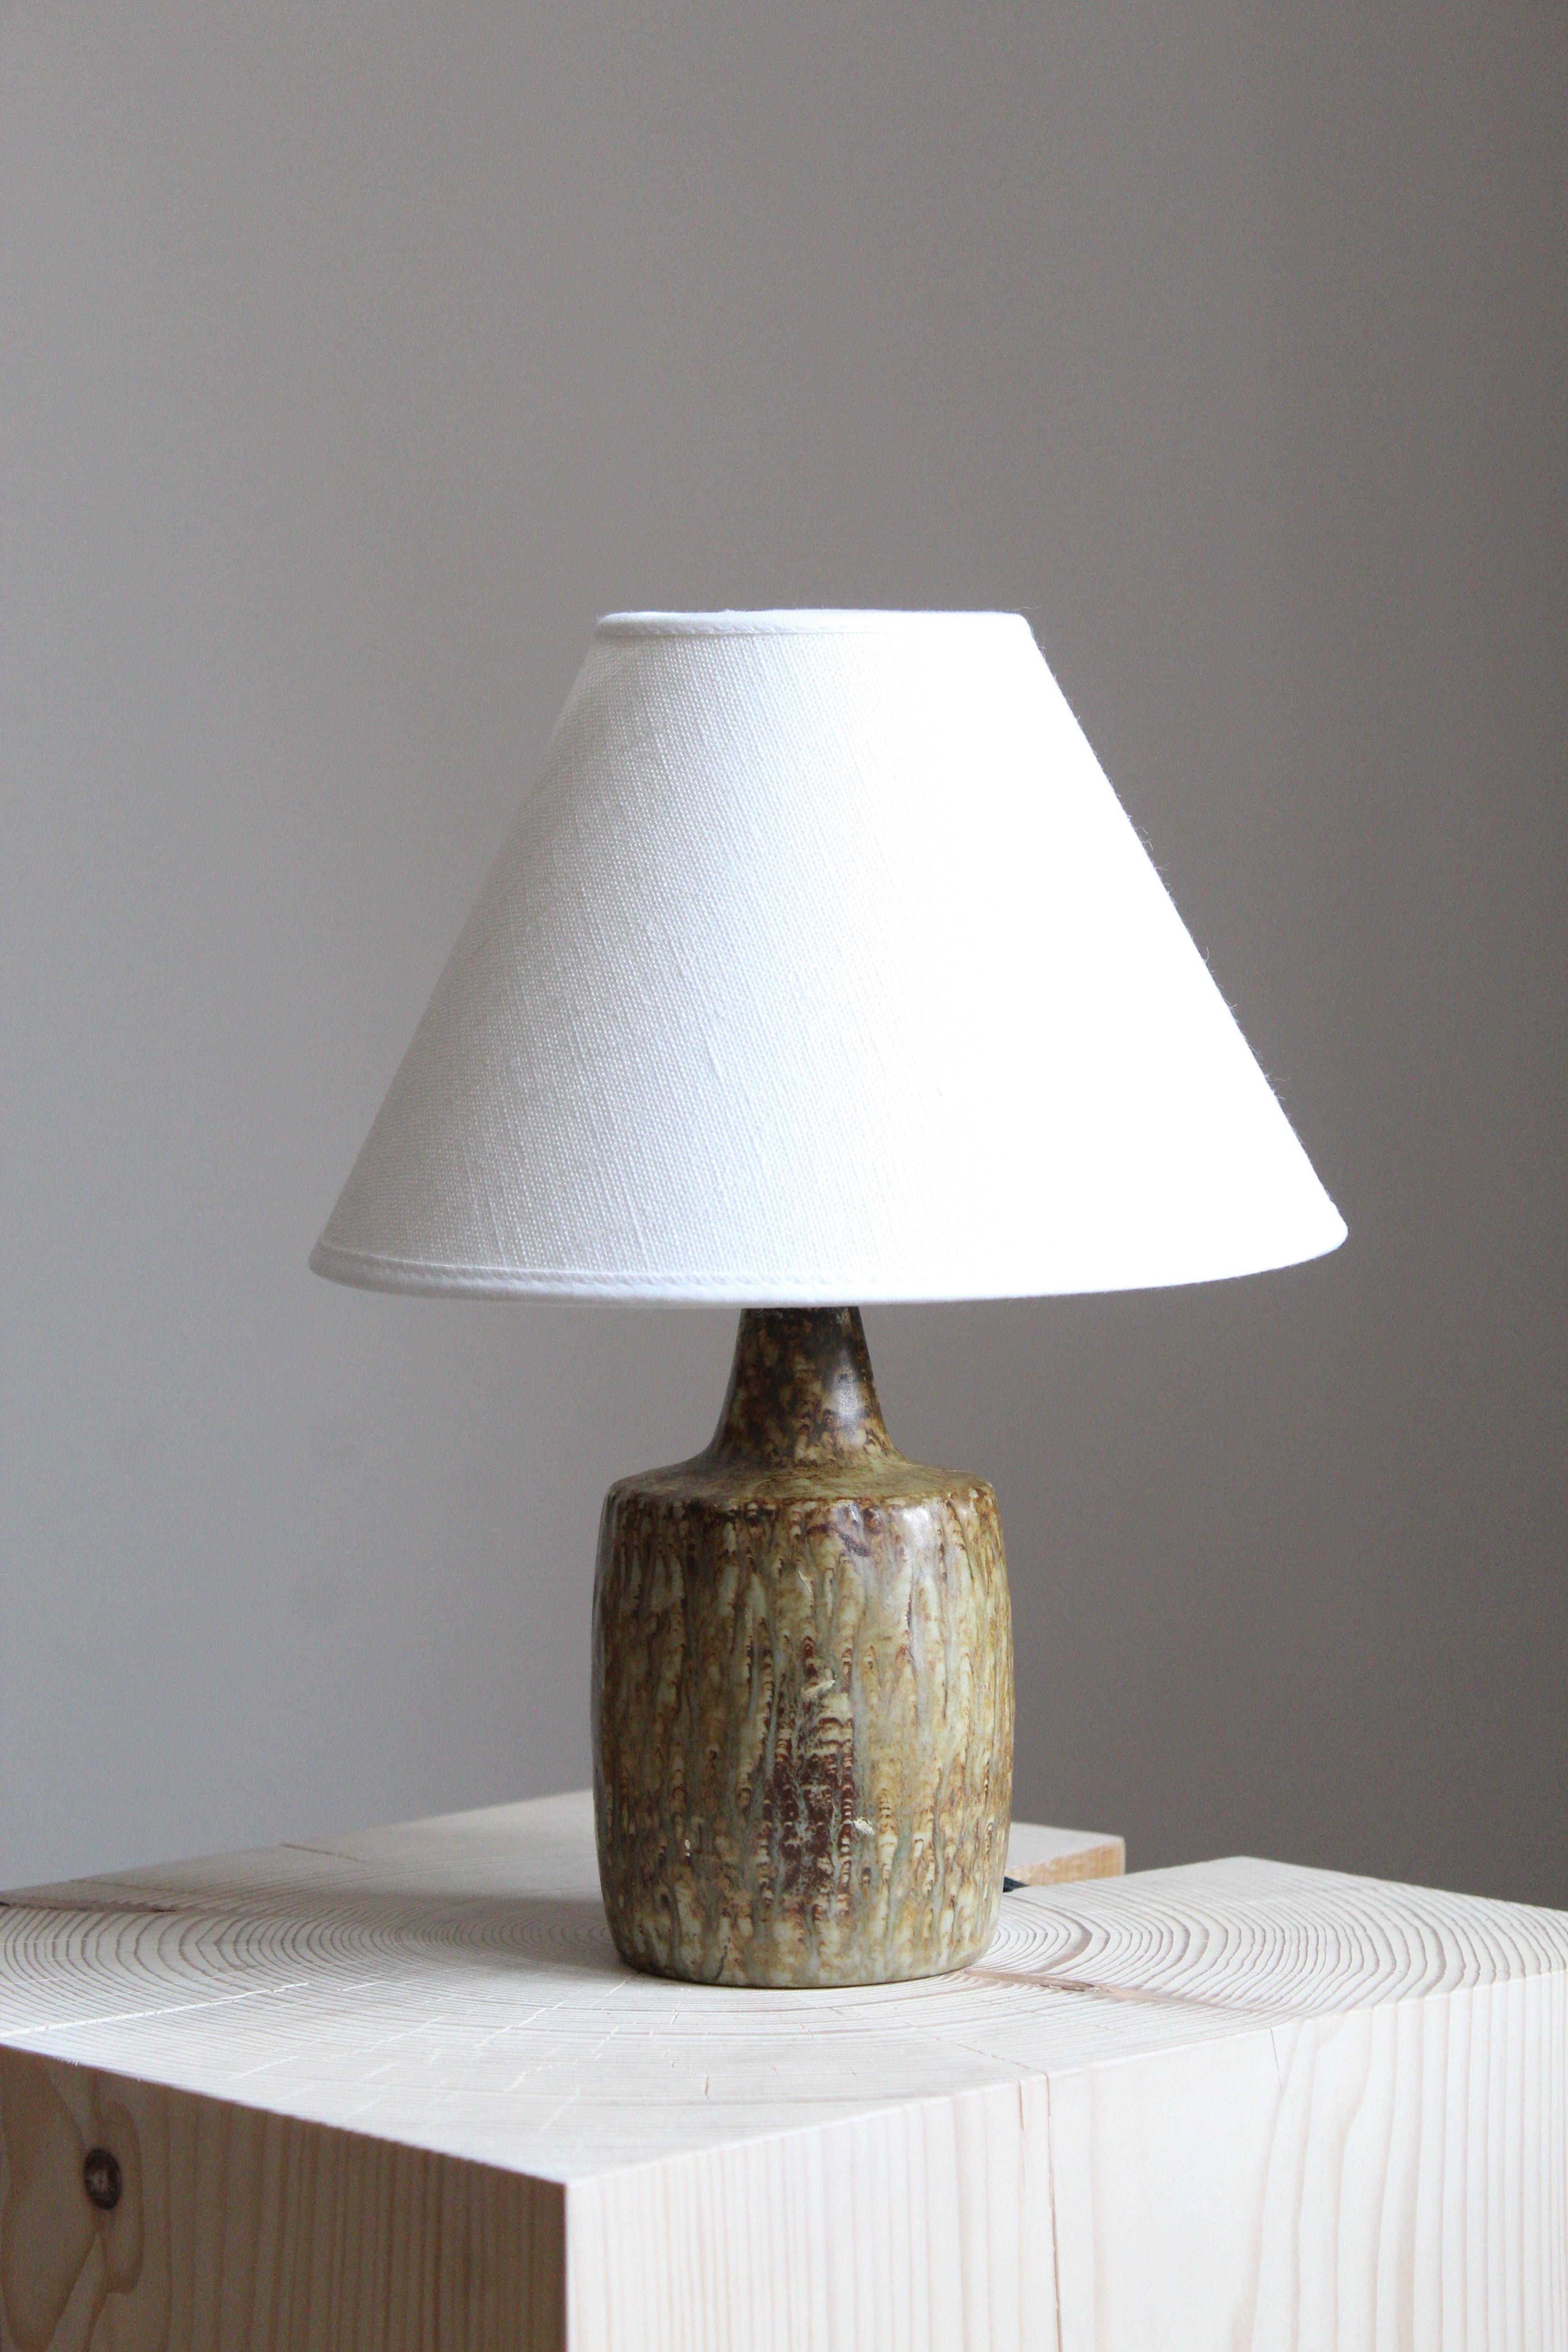 A table lamp produced by Rörstrand, Sweden, 1950s. Designed by Gunnar Nylund, (Swedish, 1914-1997). Signed.

Stated dimensions exclude lampshade, height includes socket. Sold without lampshade.

Nylund served as artistic director at Rörstrand, where